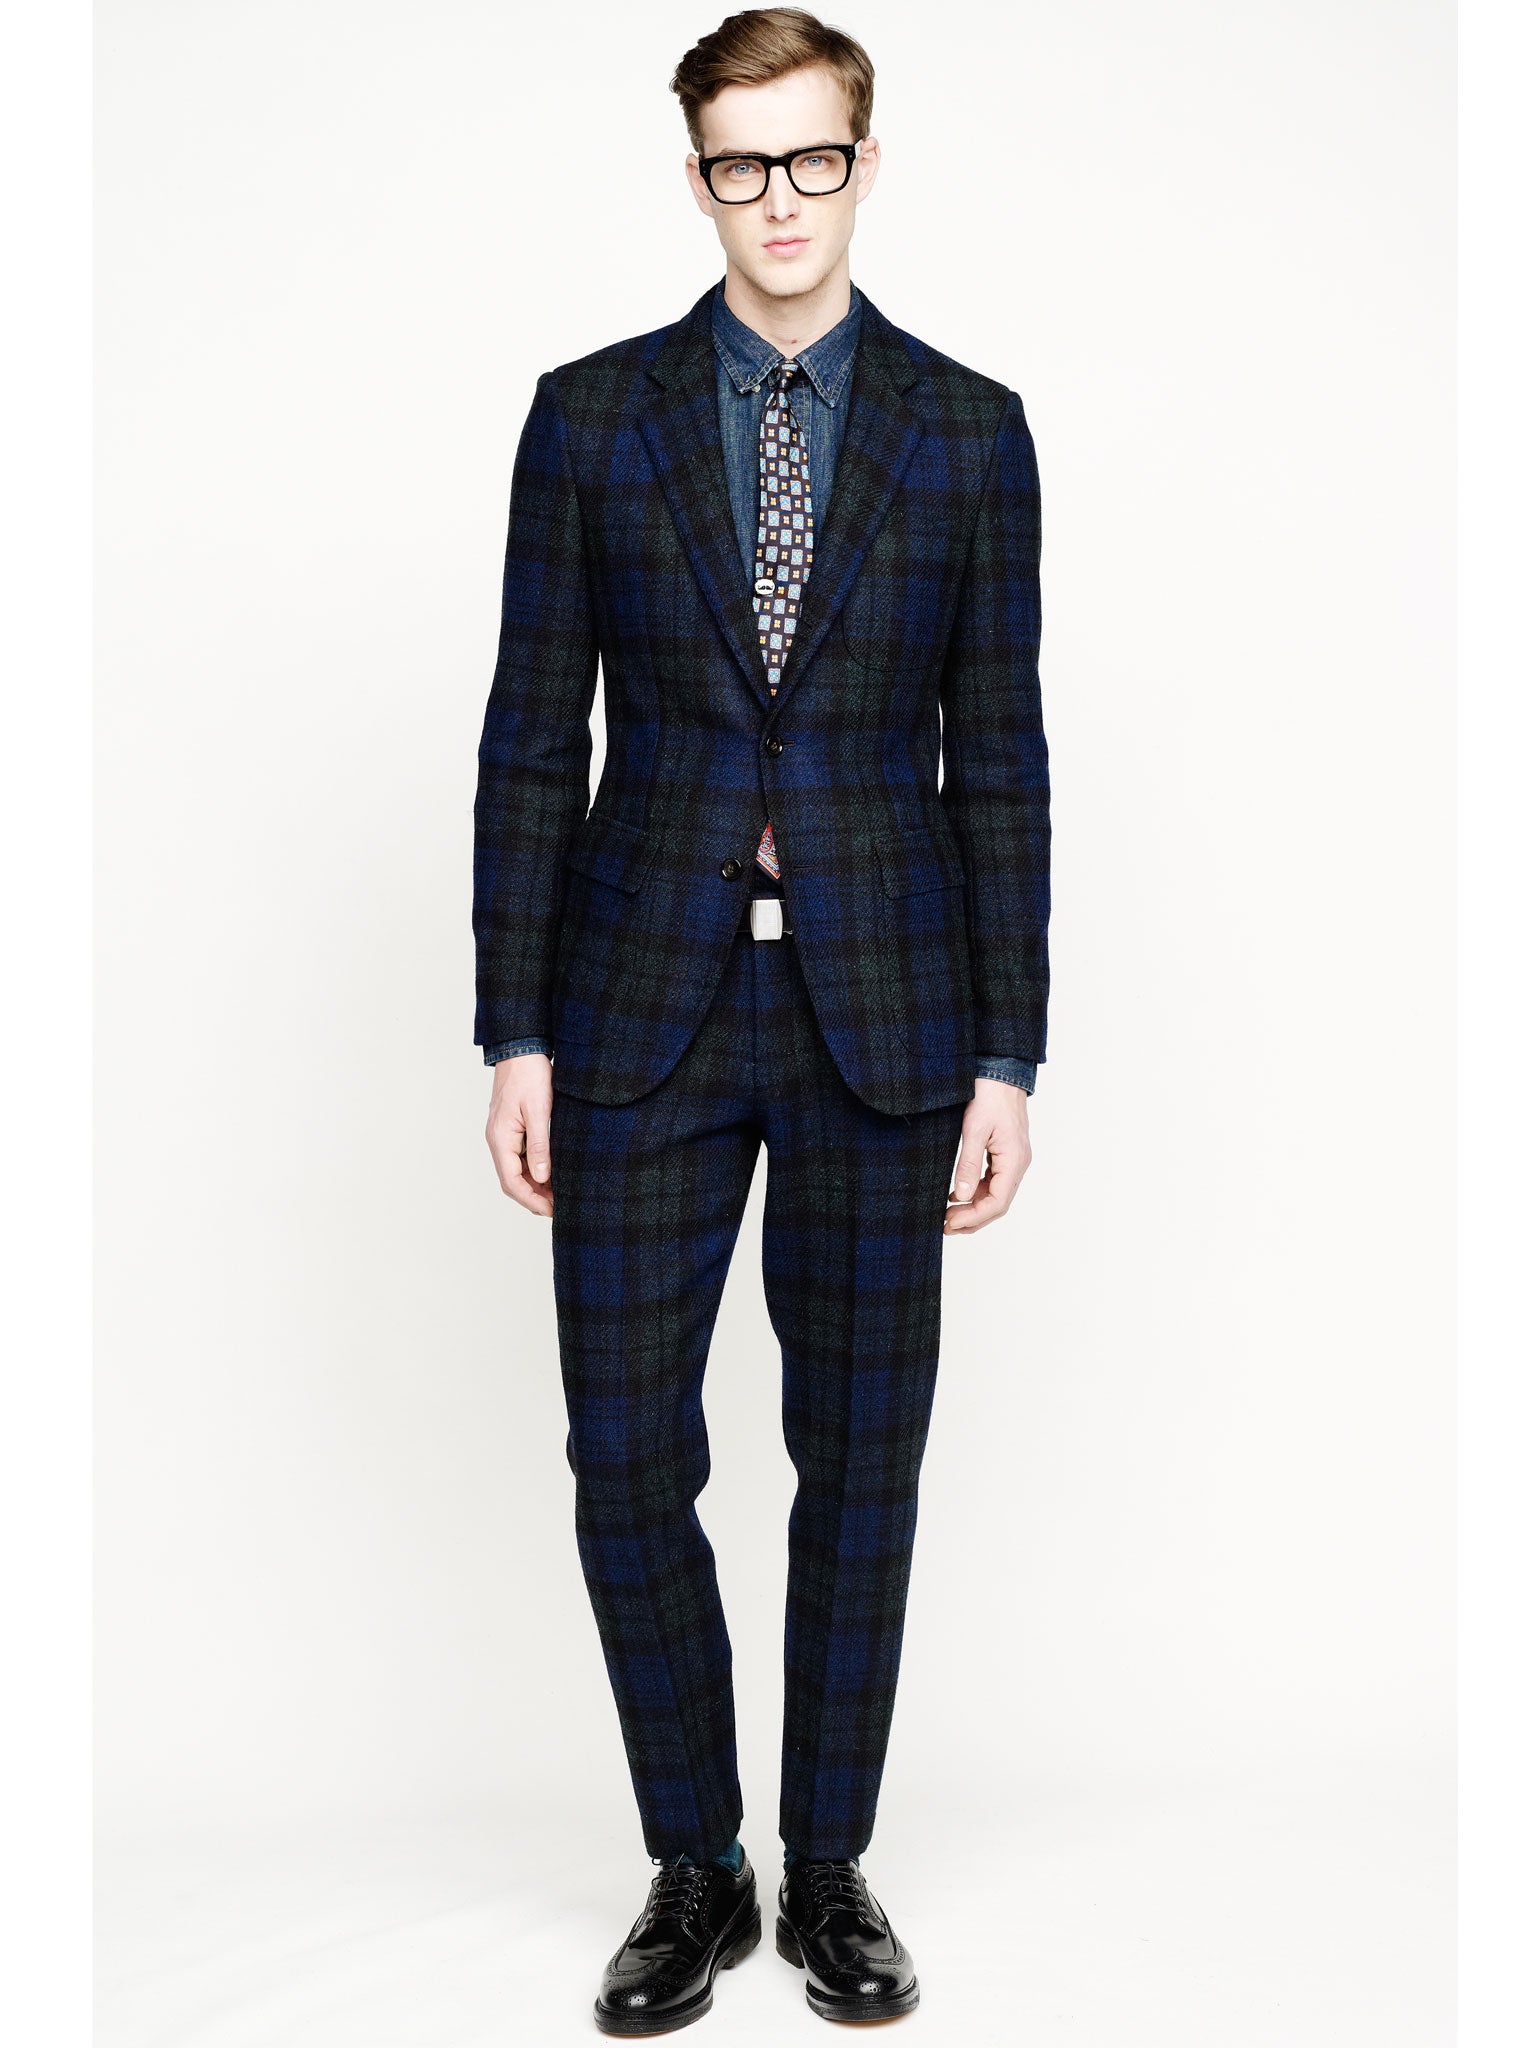 Bouncing checks: Woollen suits and Knits | The Independent